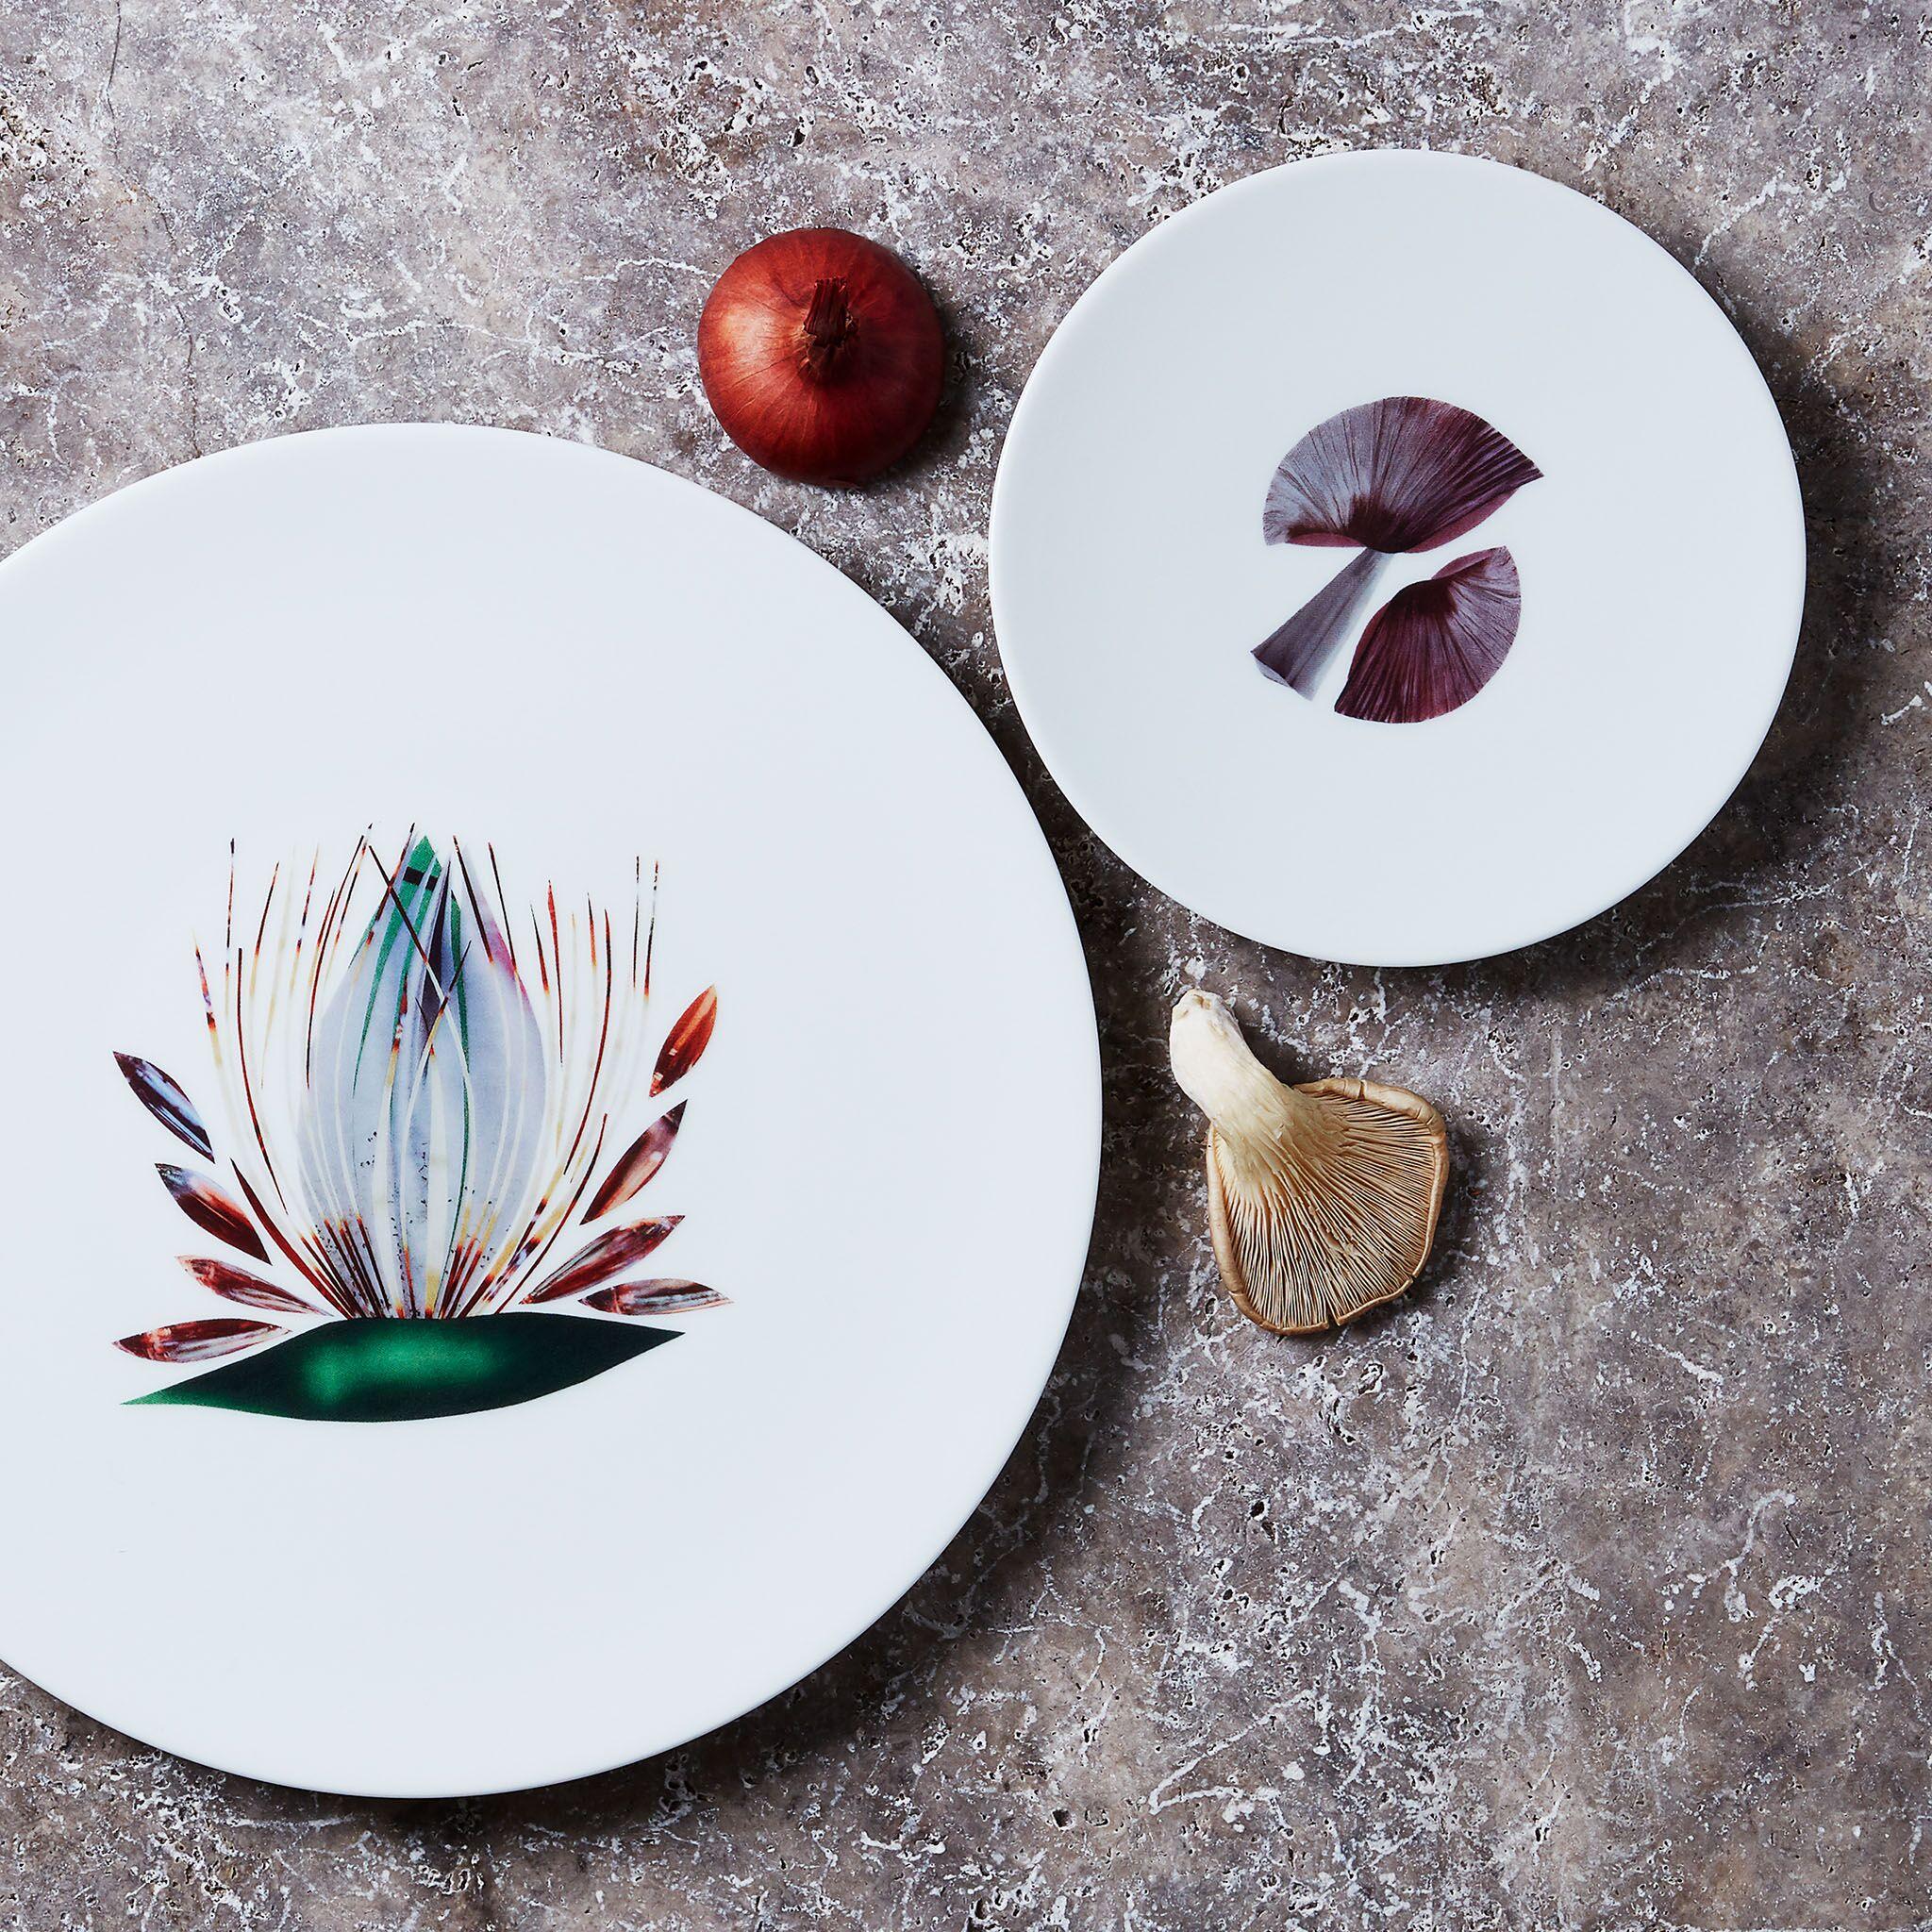 Contemporary Dinner Porcelain Plate by the French Chef Alain Passard Model 